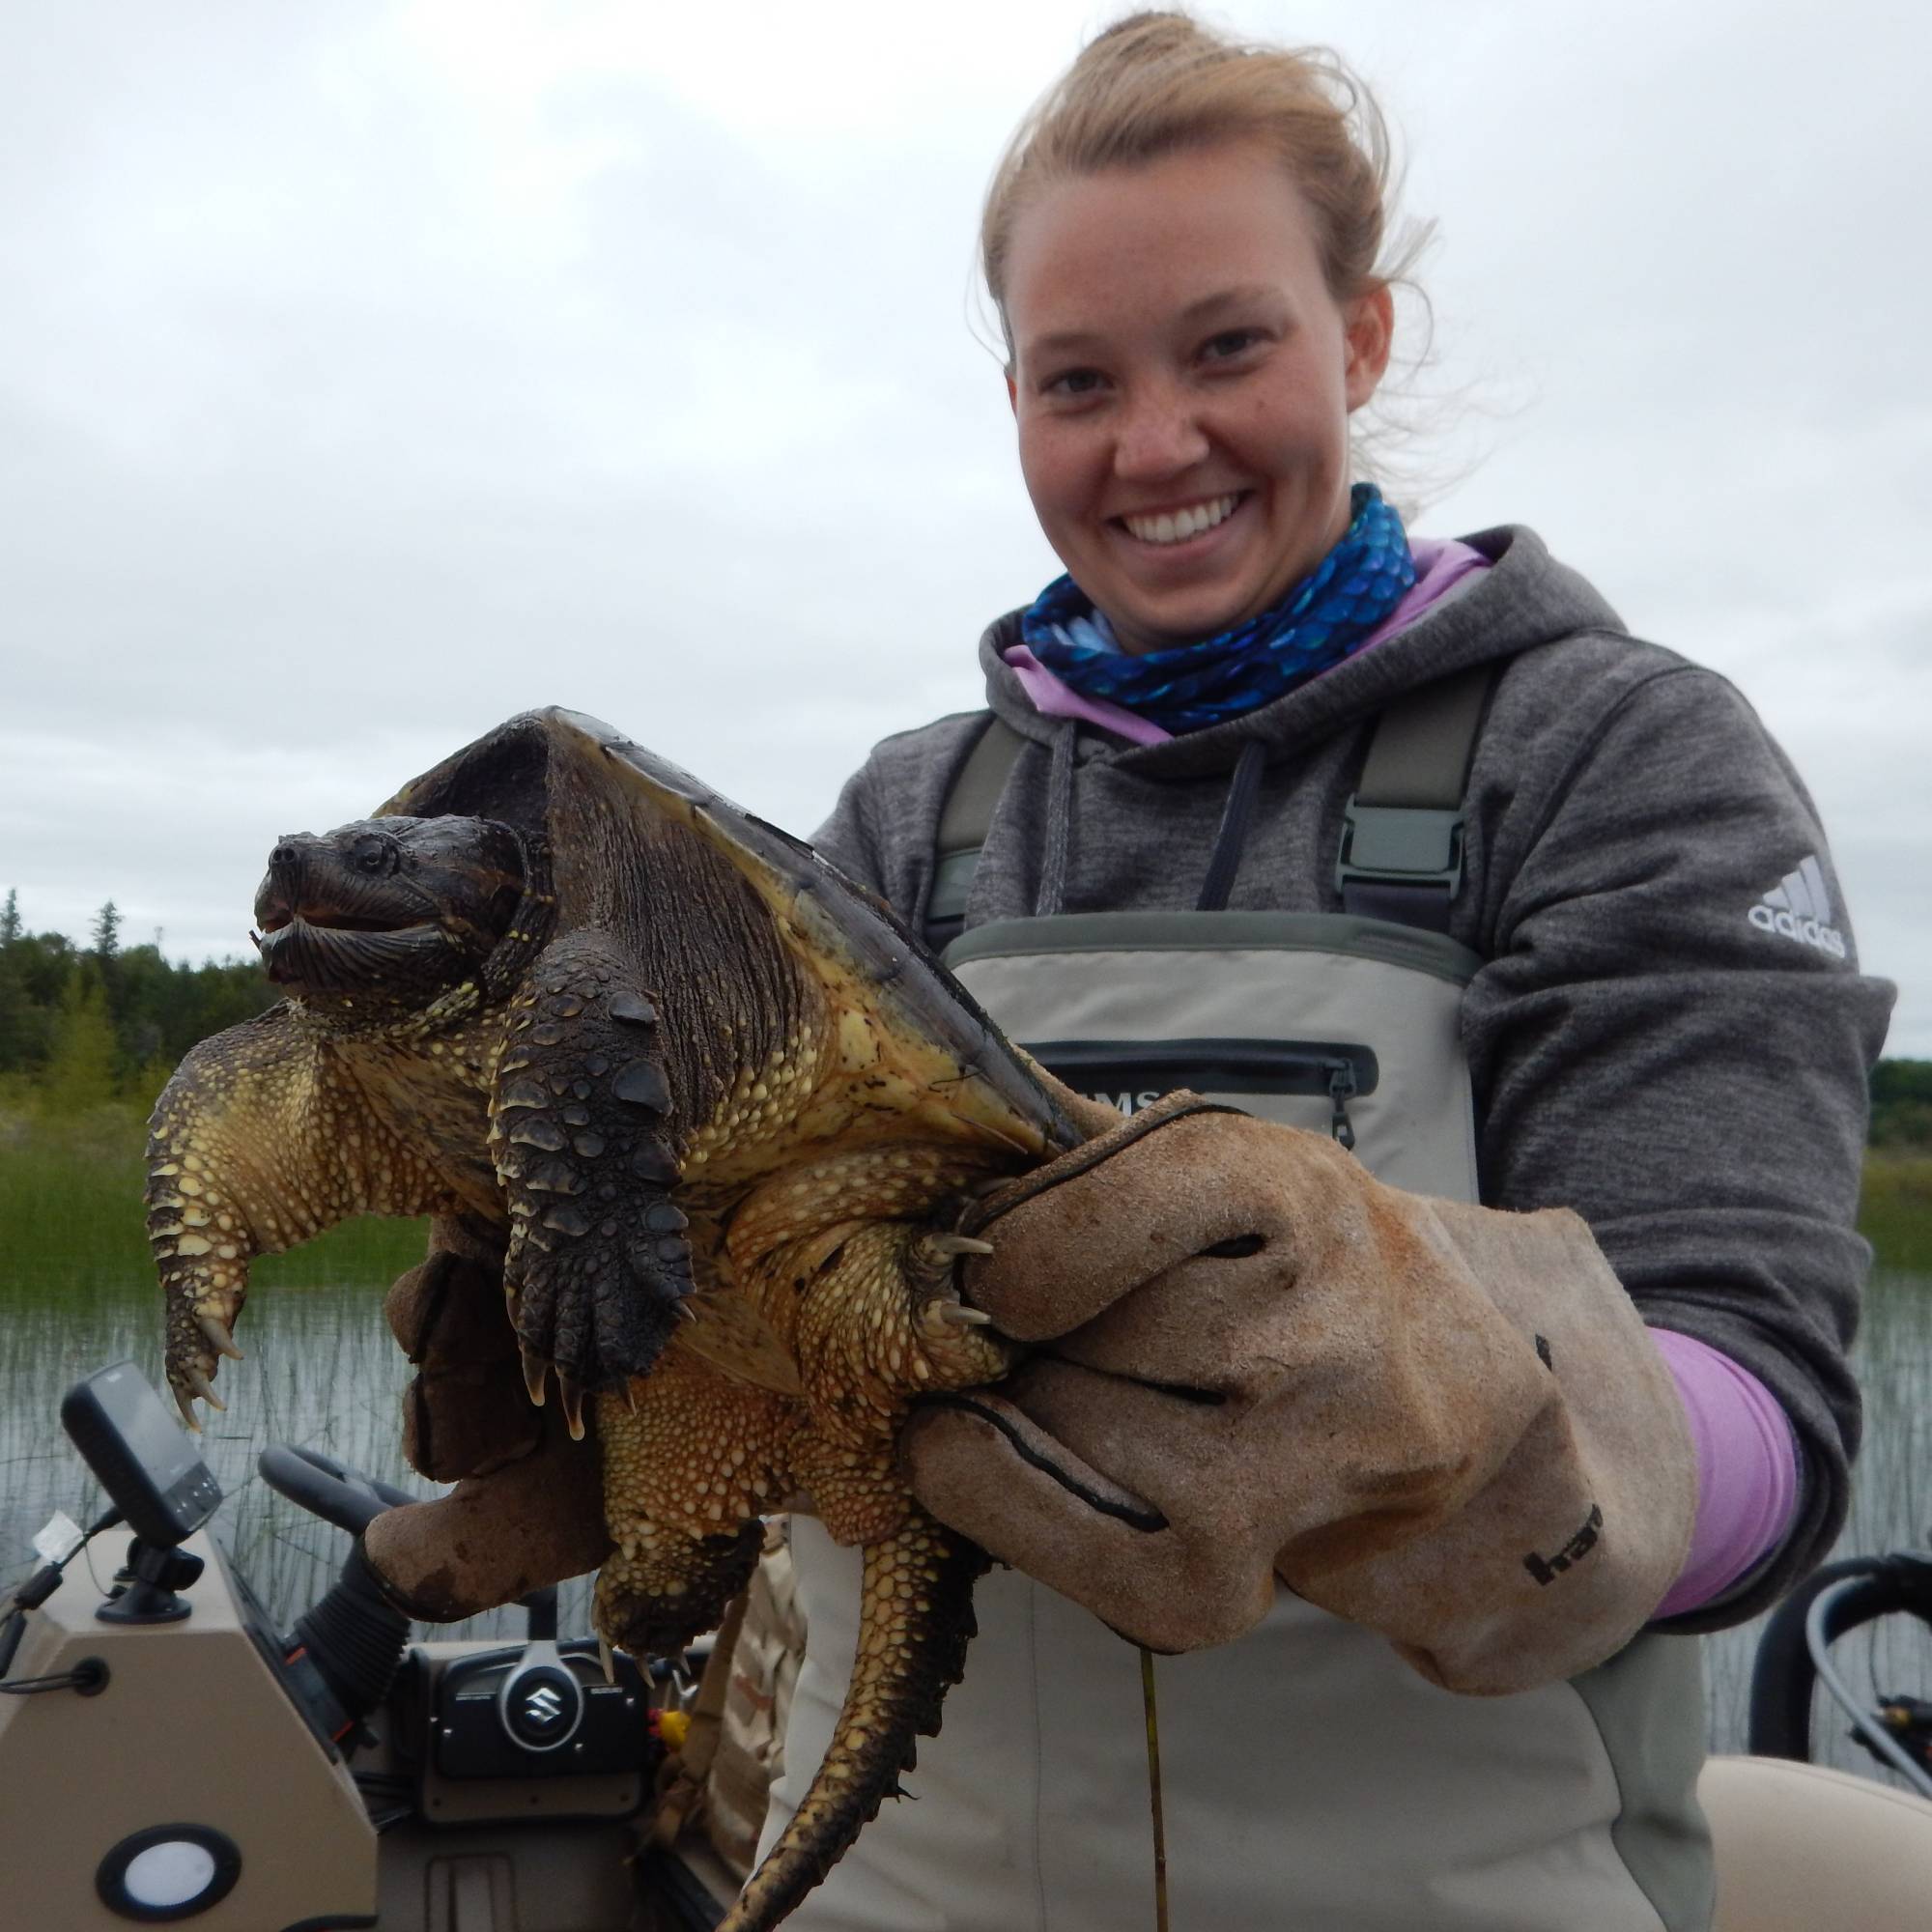 Megan with snapping turtle